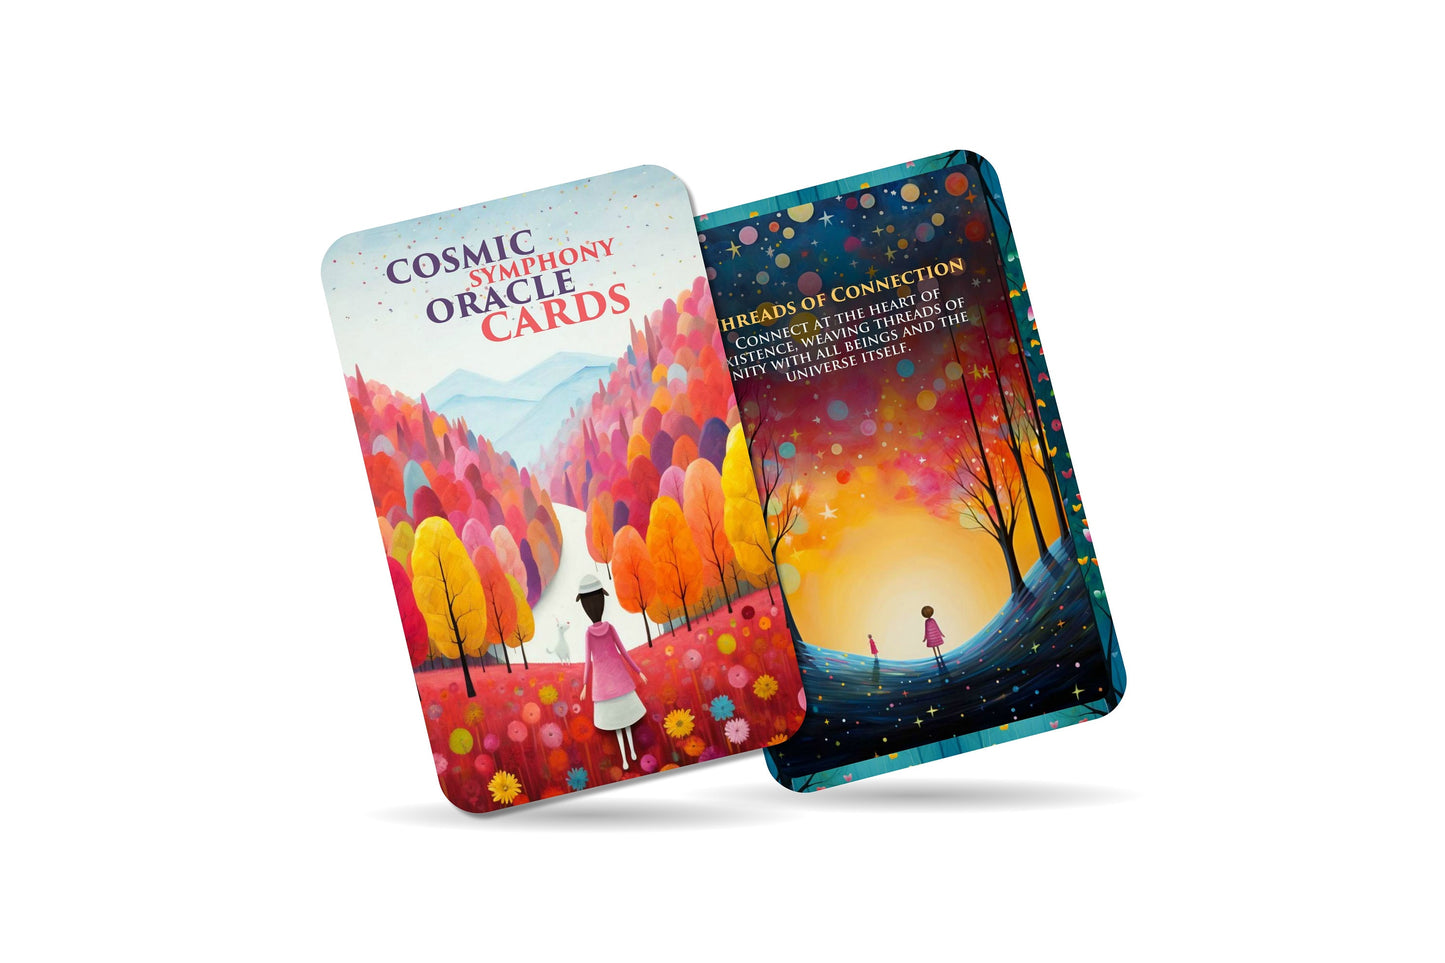 Cosmic Symphony - Oracle Cards - The cosmic vibrations of the universe and the inner melodies of the soul